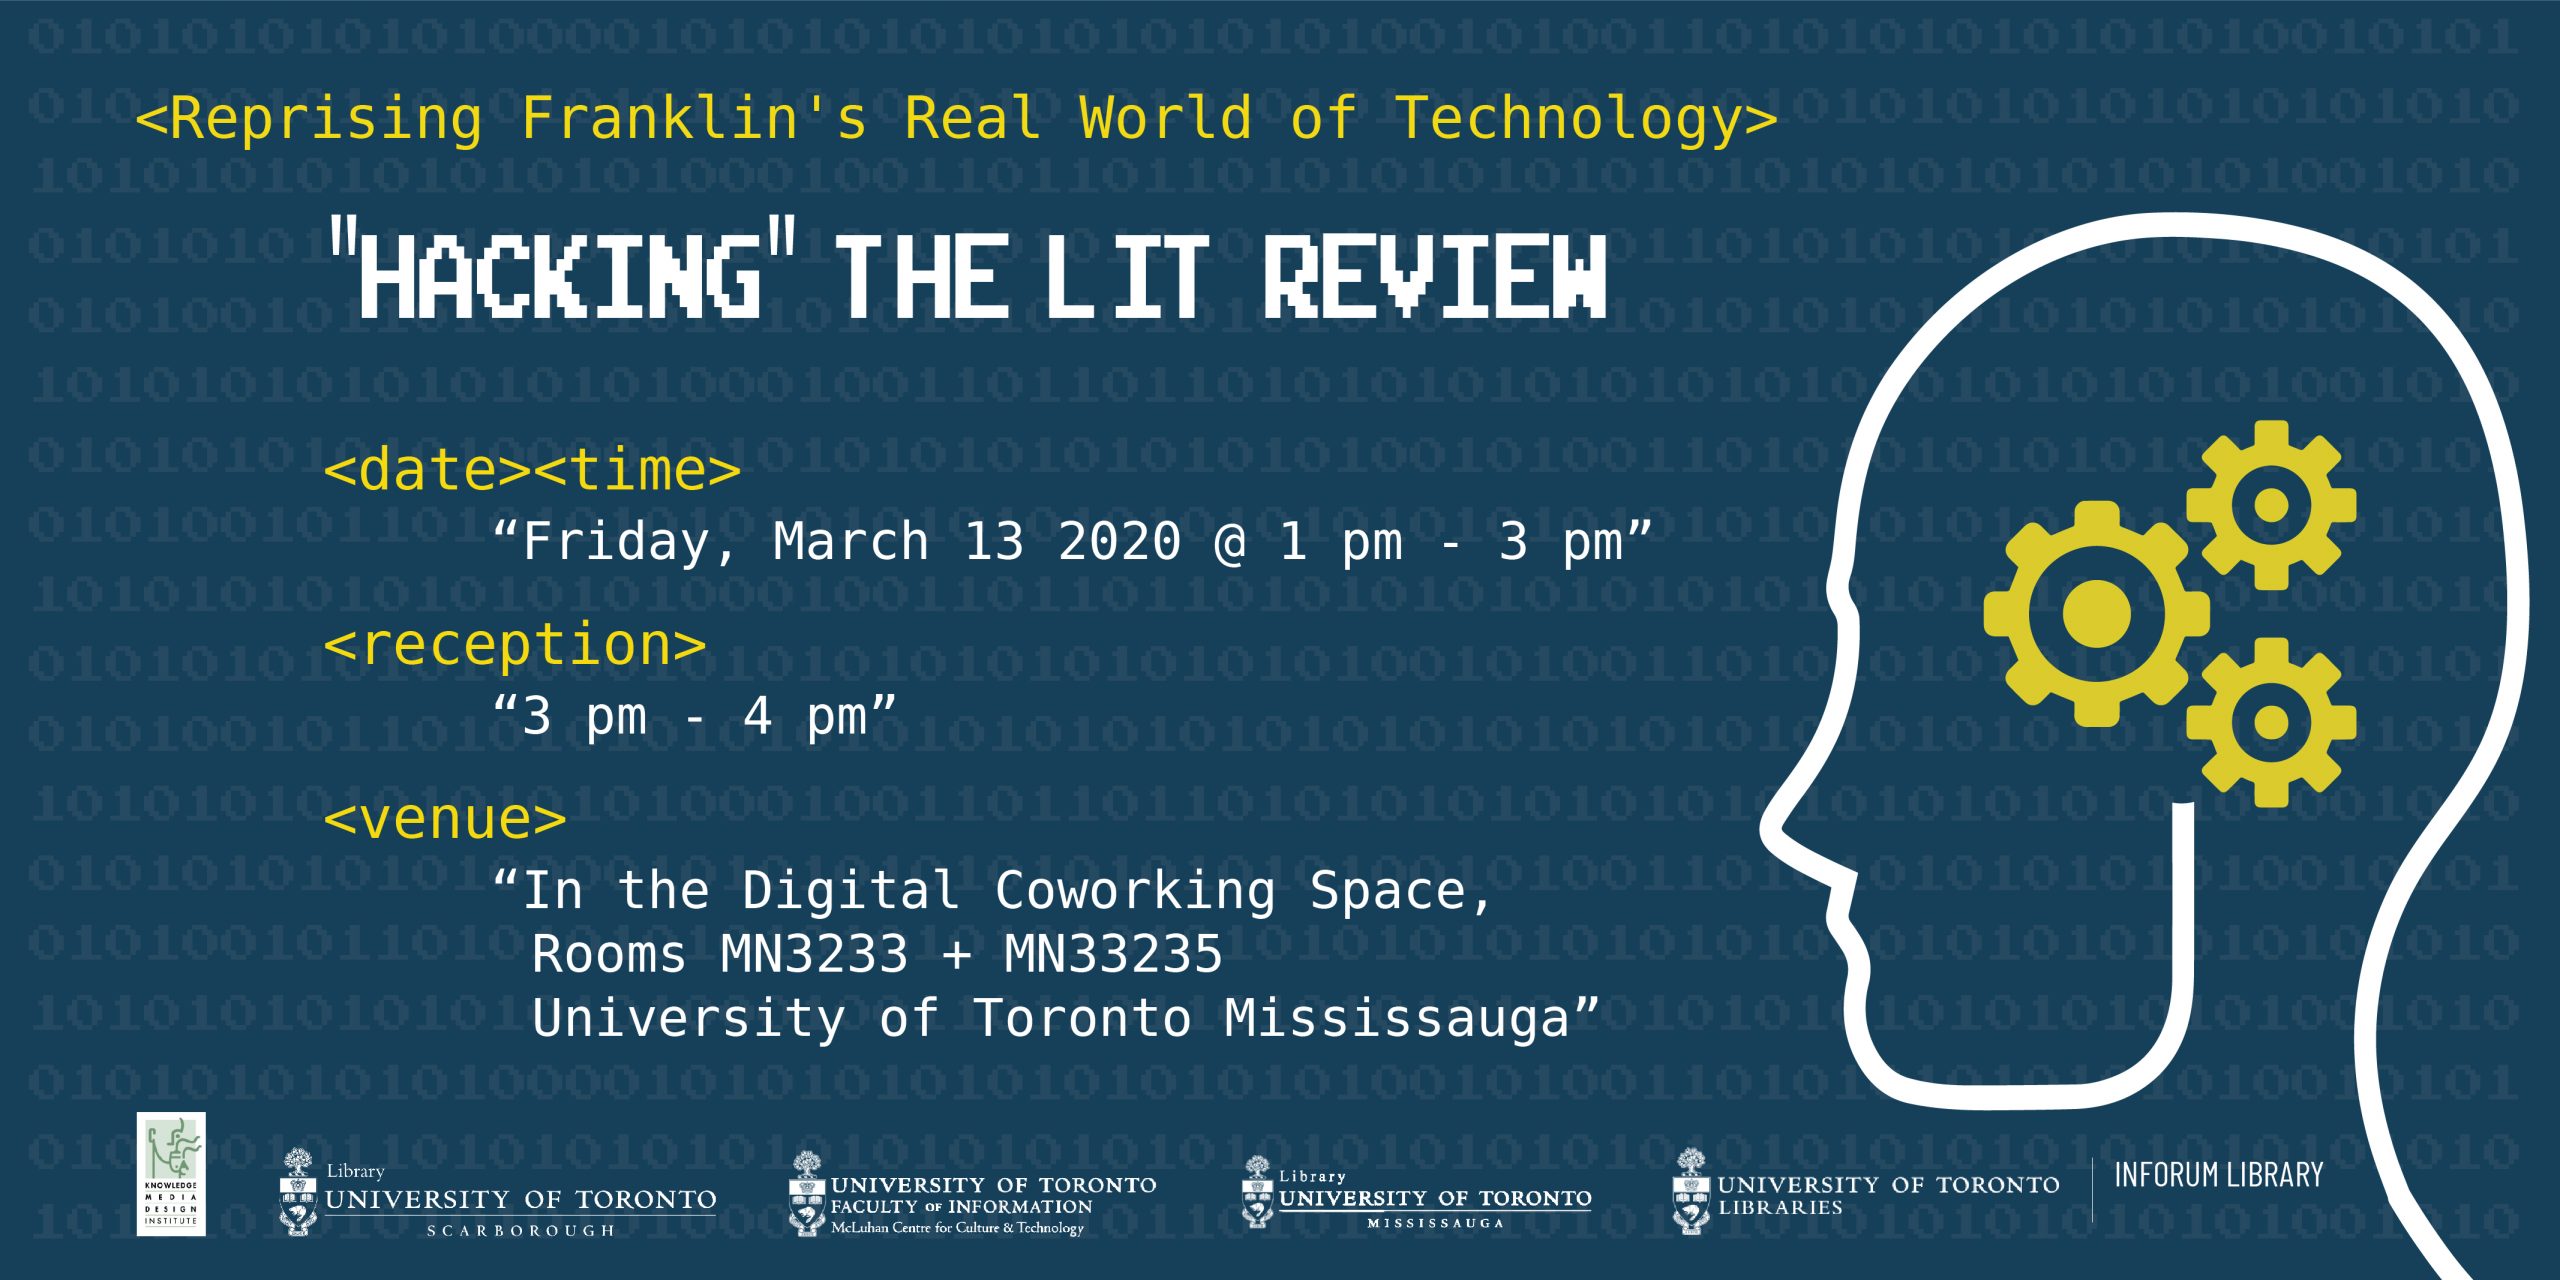 Hacking-The Literature Review event